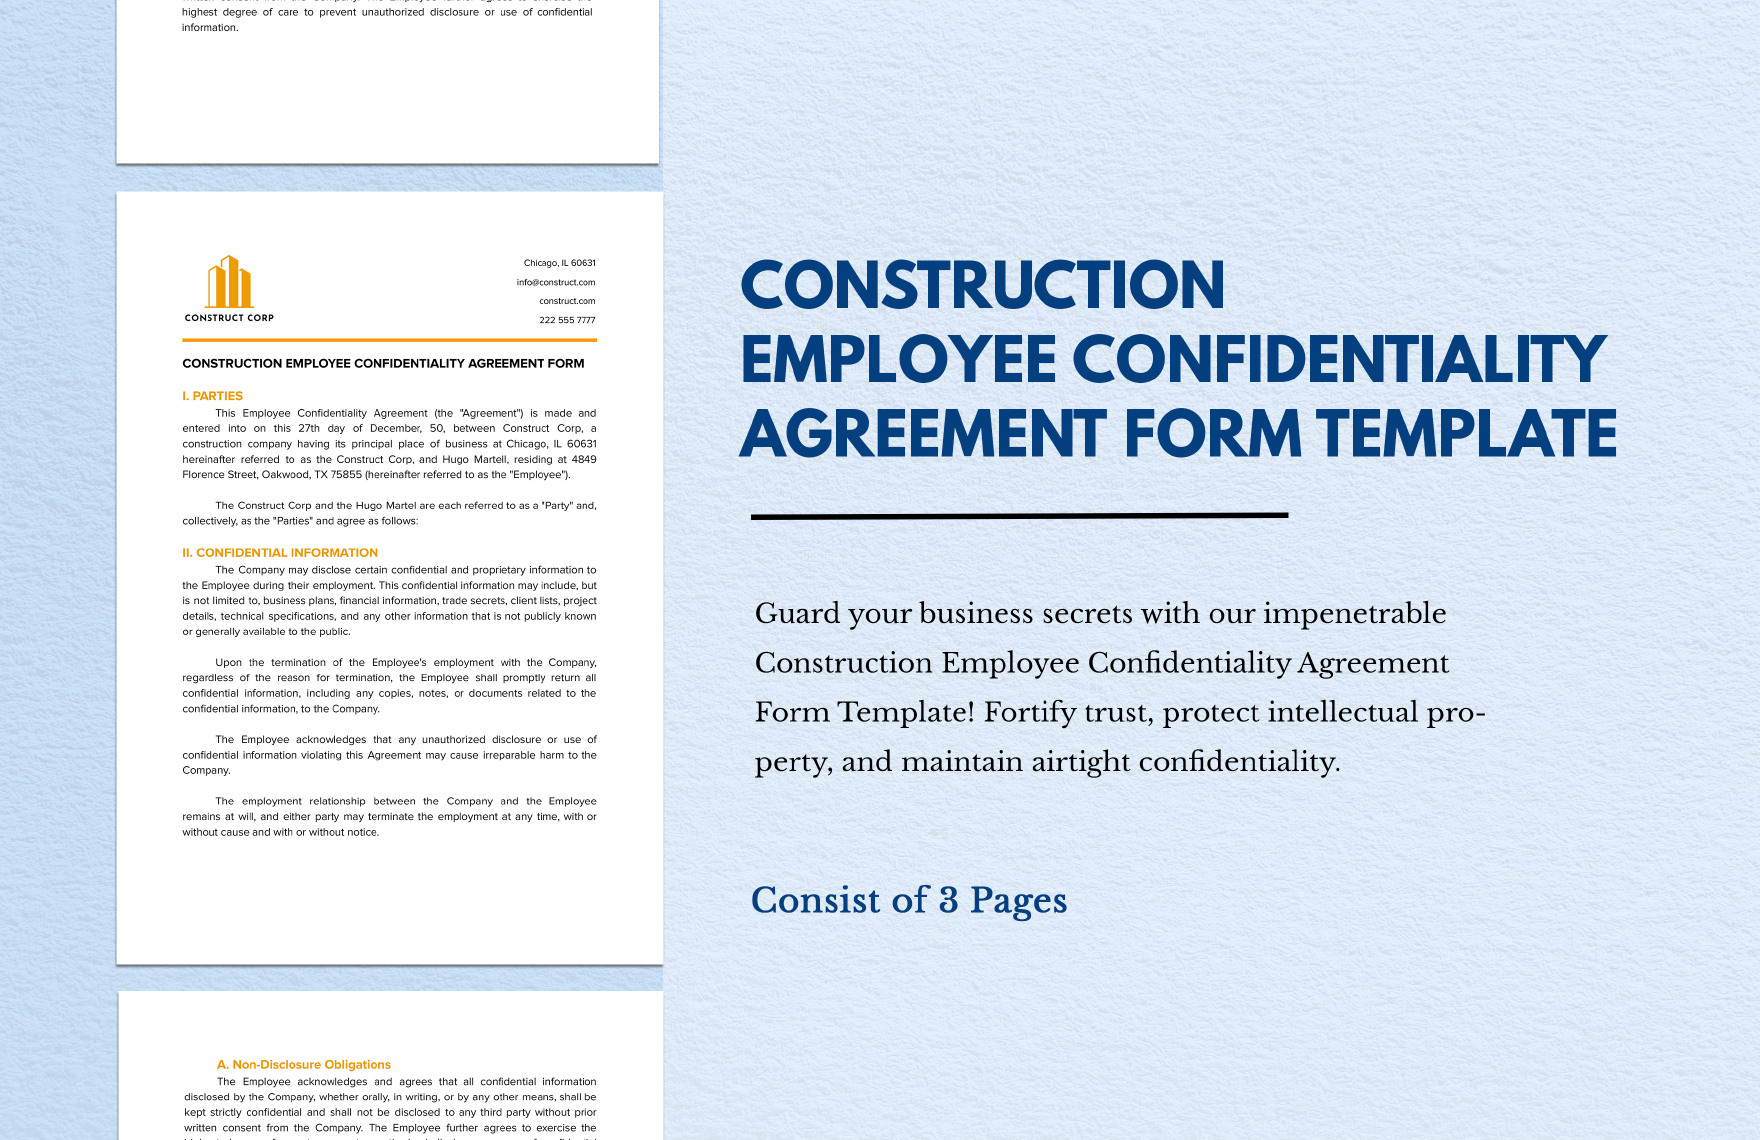 Construction Employee Confidentiality Agreement Form